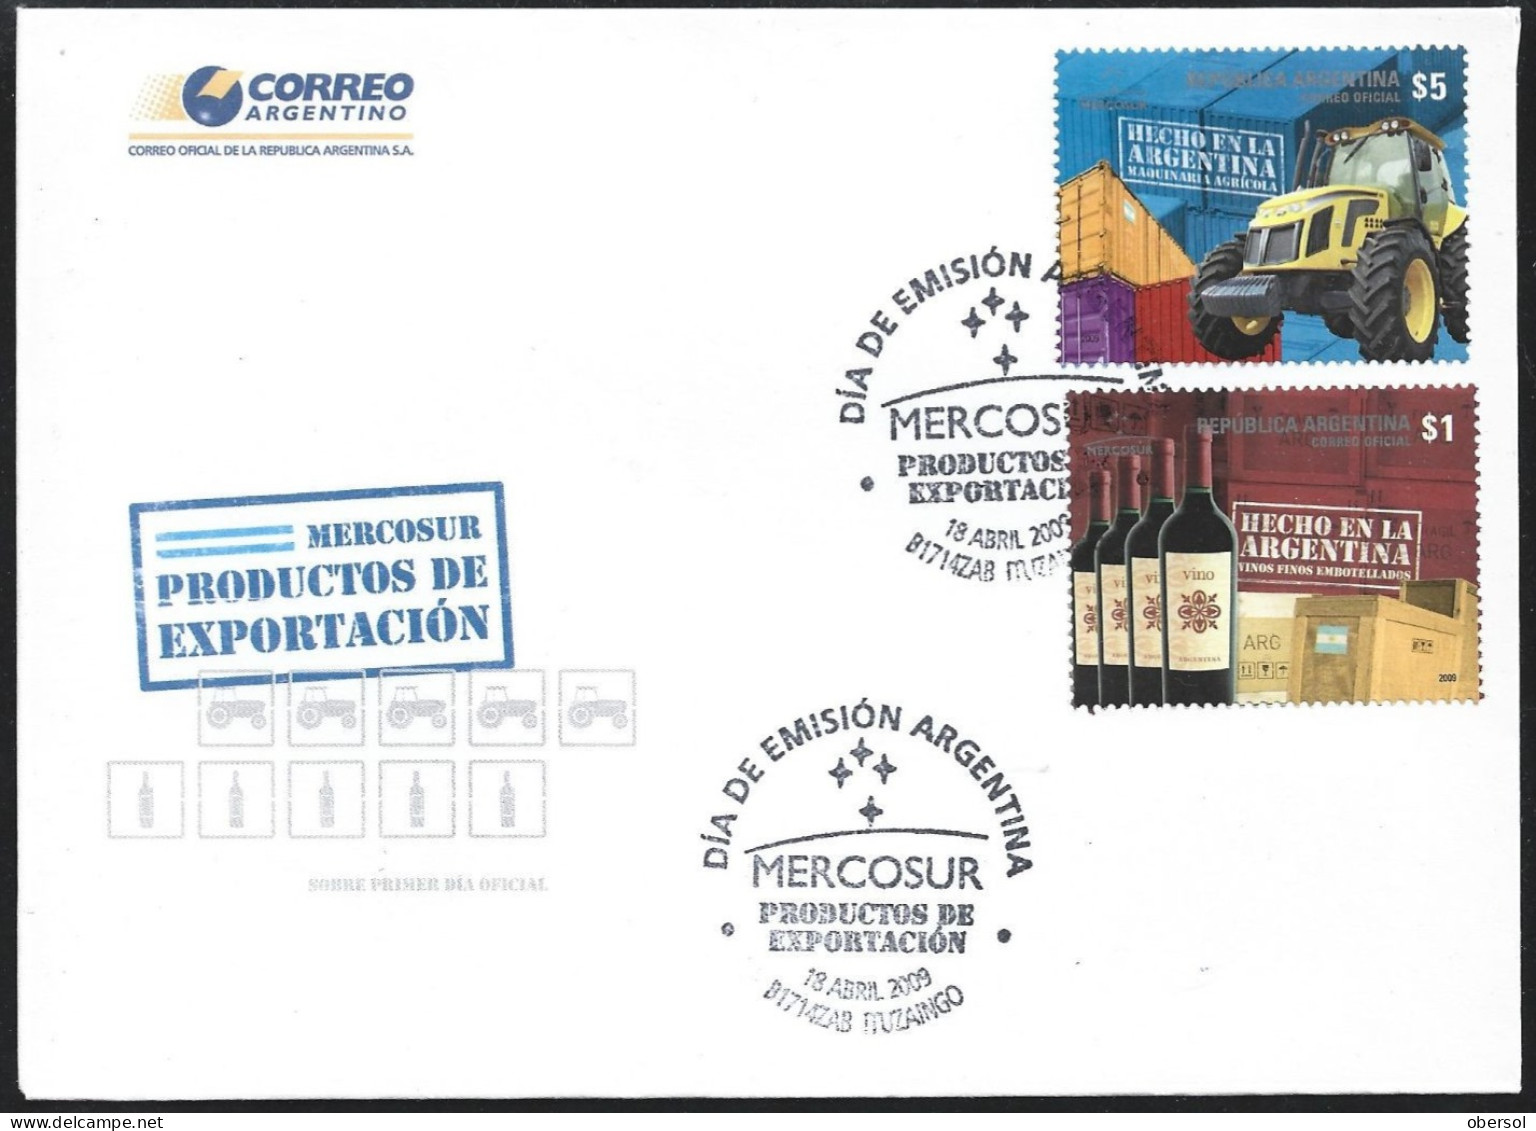 Argentina 2009 National Production Wines MERCOSUR Official Cover First Day Issue FDC - Covers & Documents